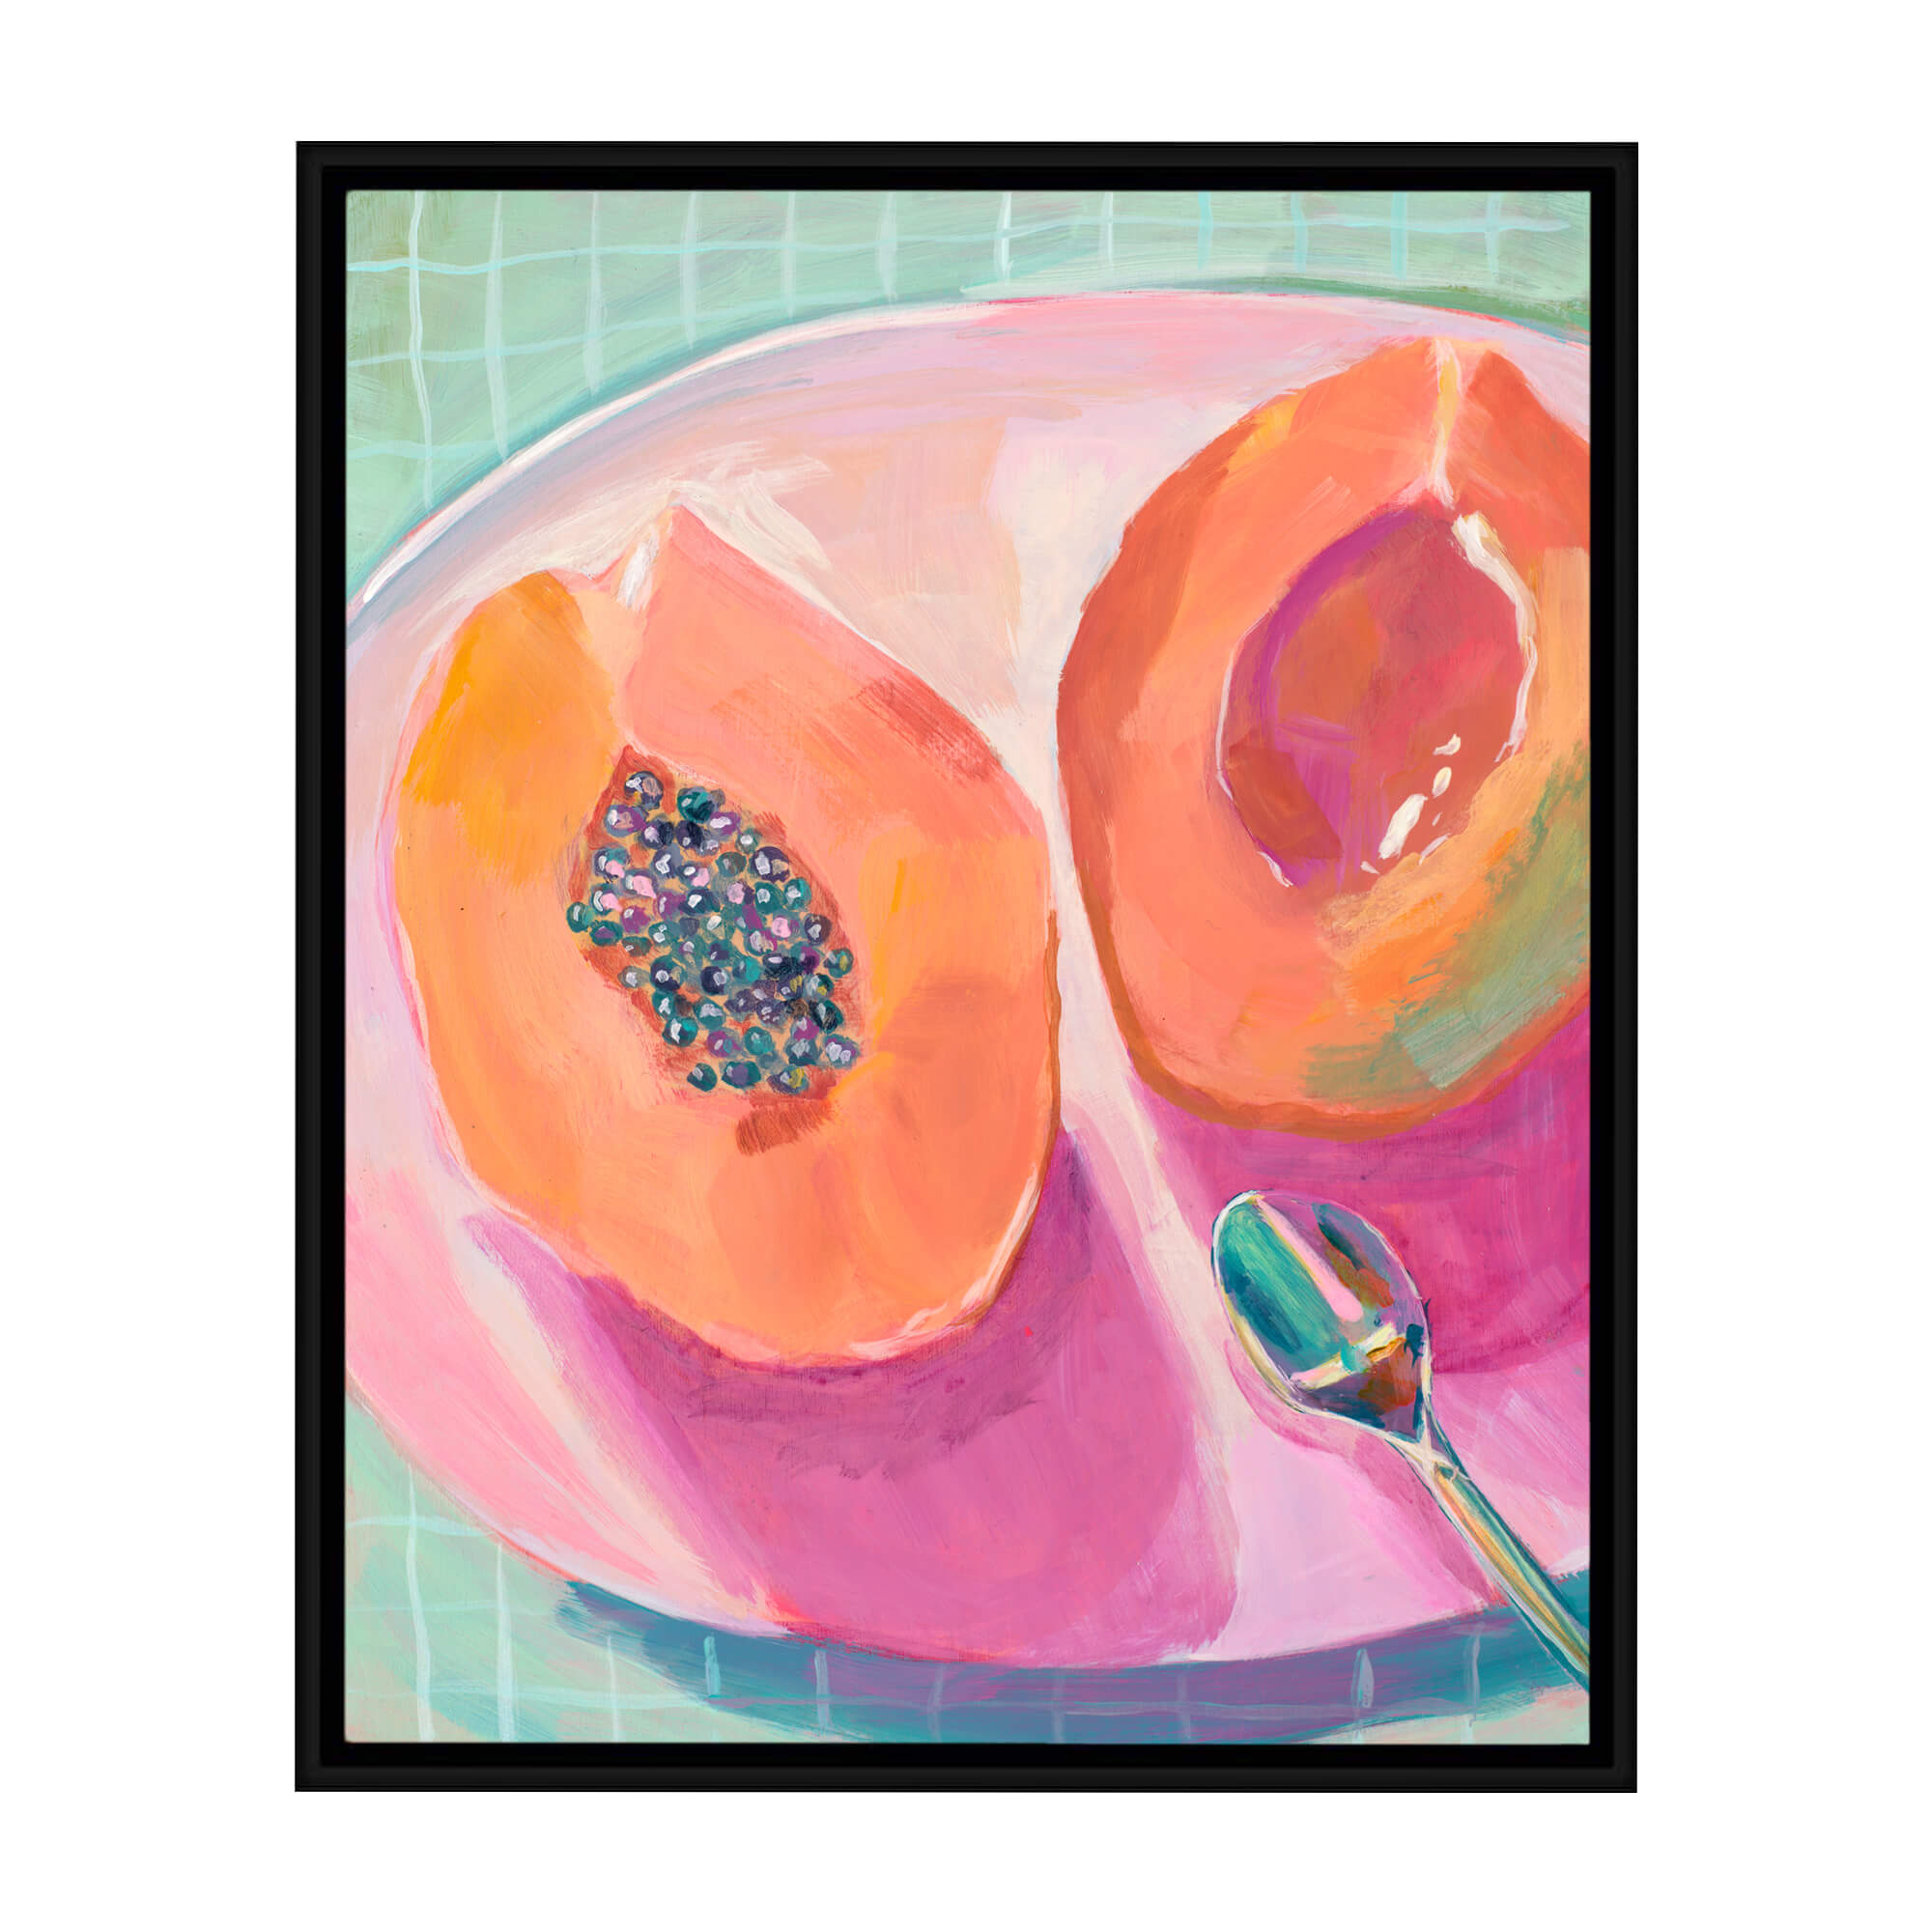 A papa fruit on a plate ready to eat by Hawaii artist Lindsay Wilkins